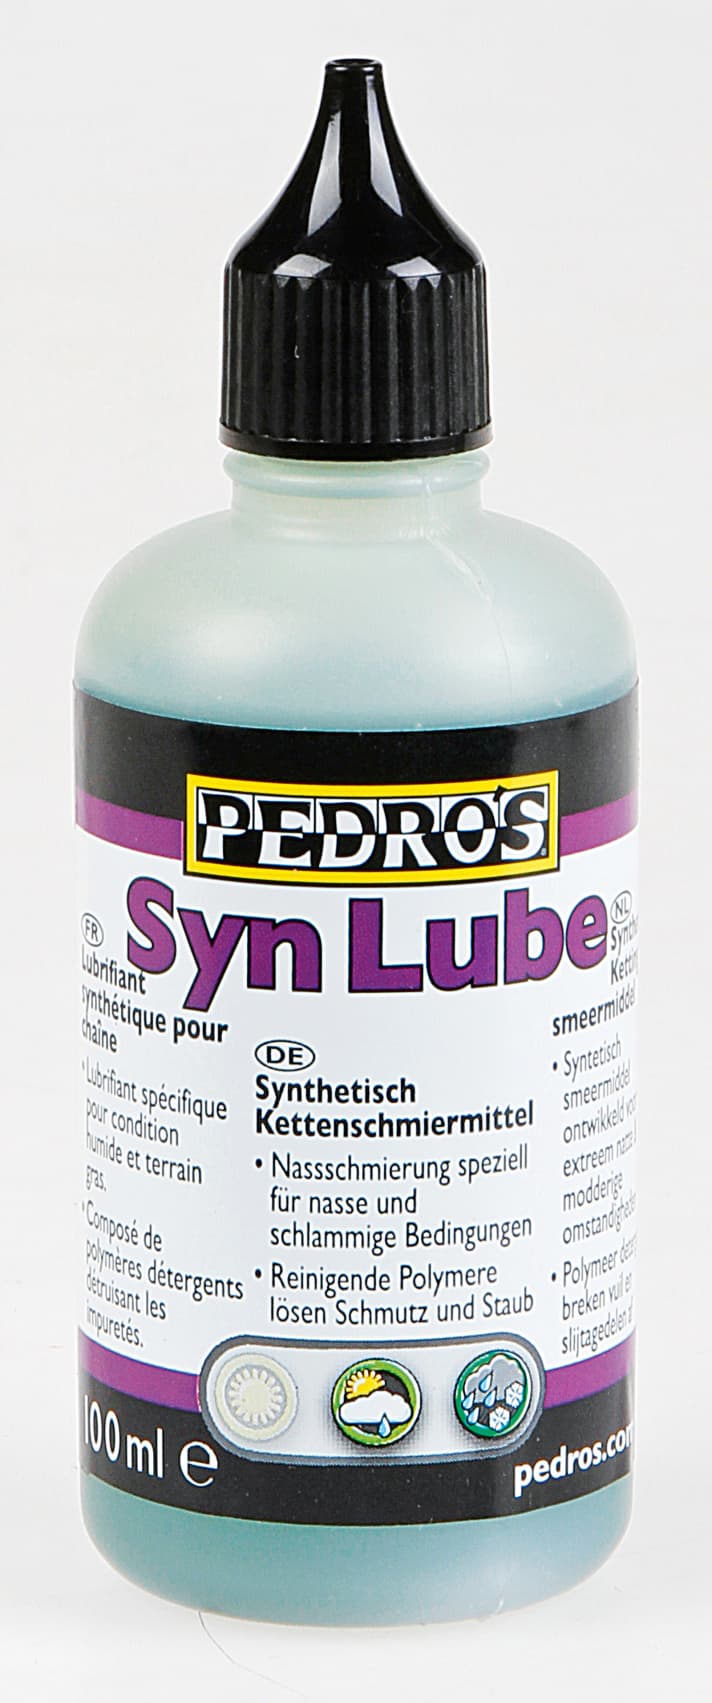   Pedro’s Syn Lube